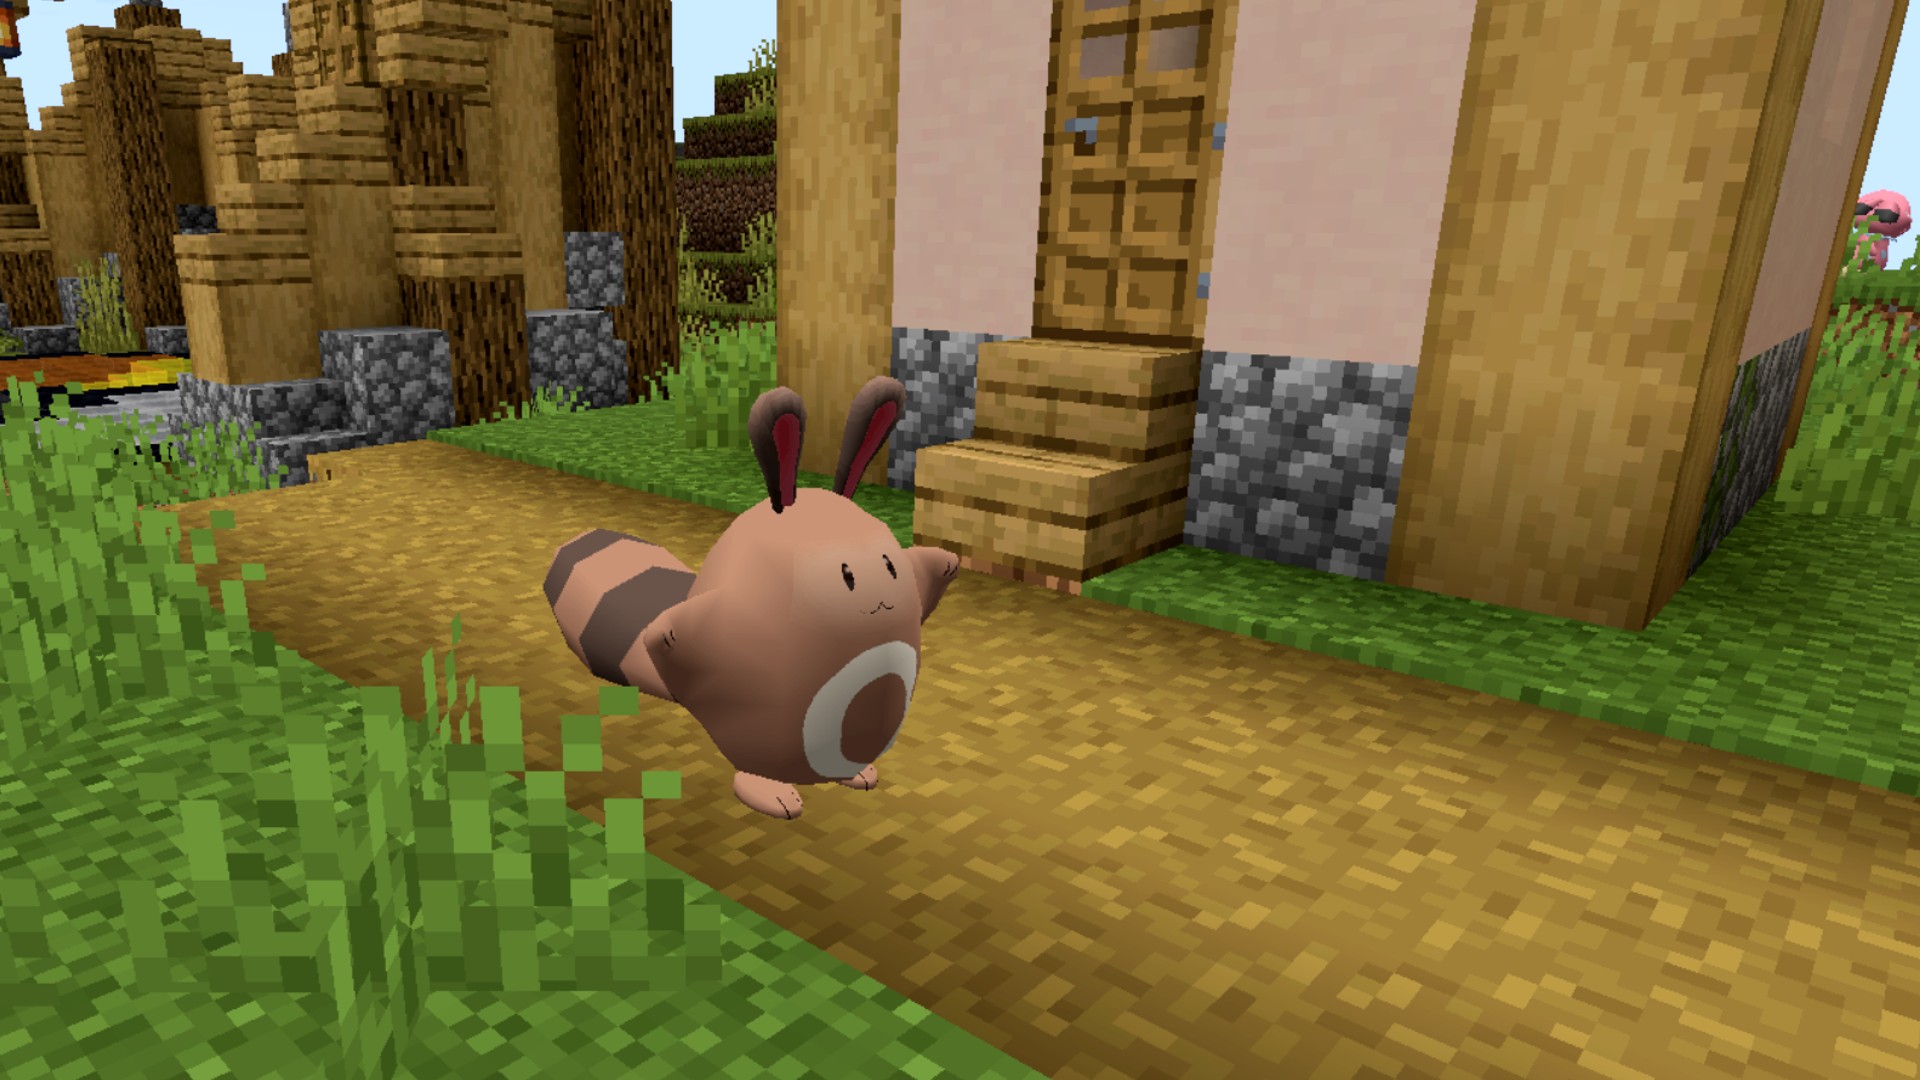 This Minecraft map packs a full new Pokémon game